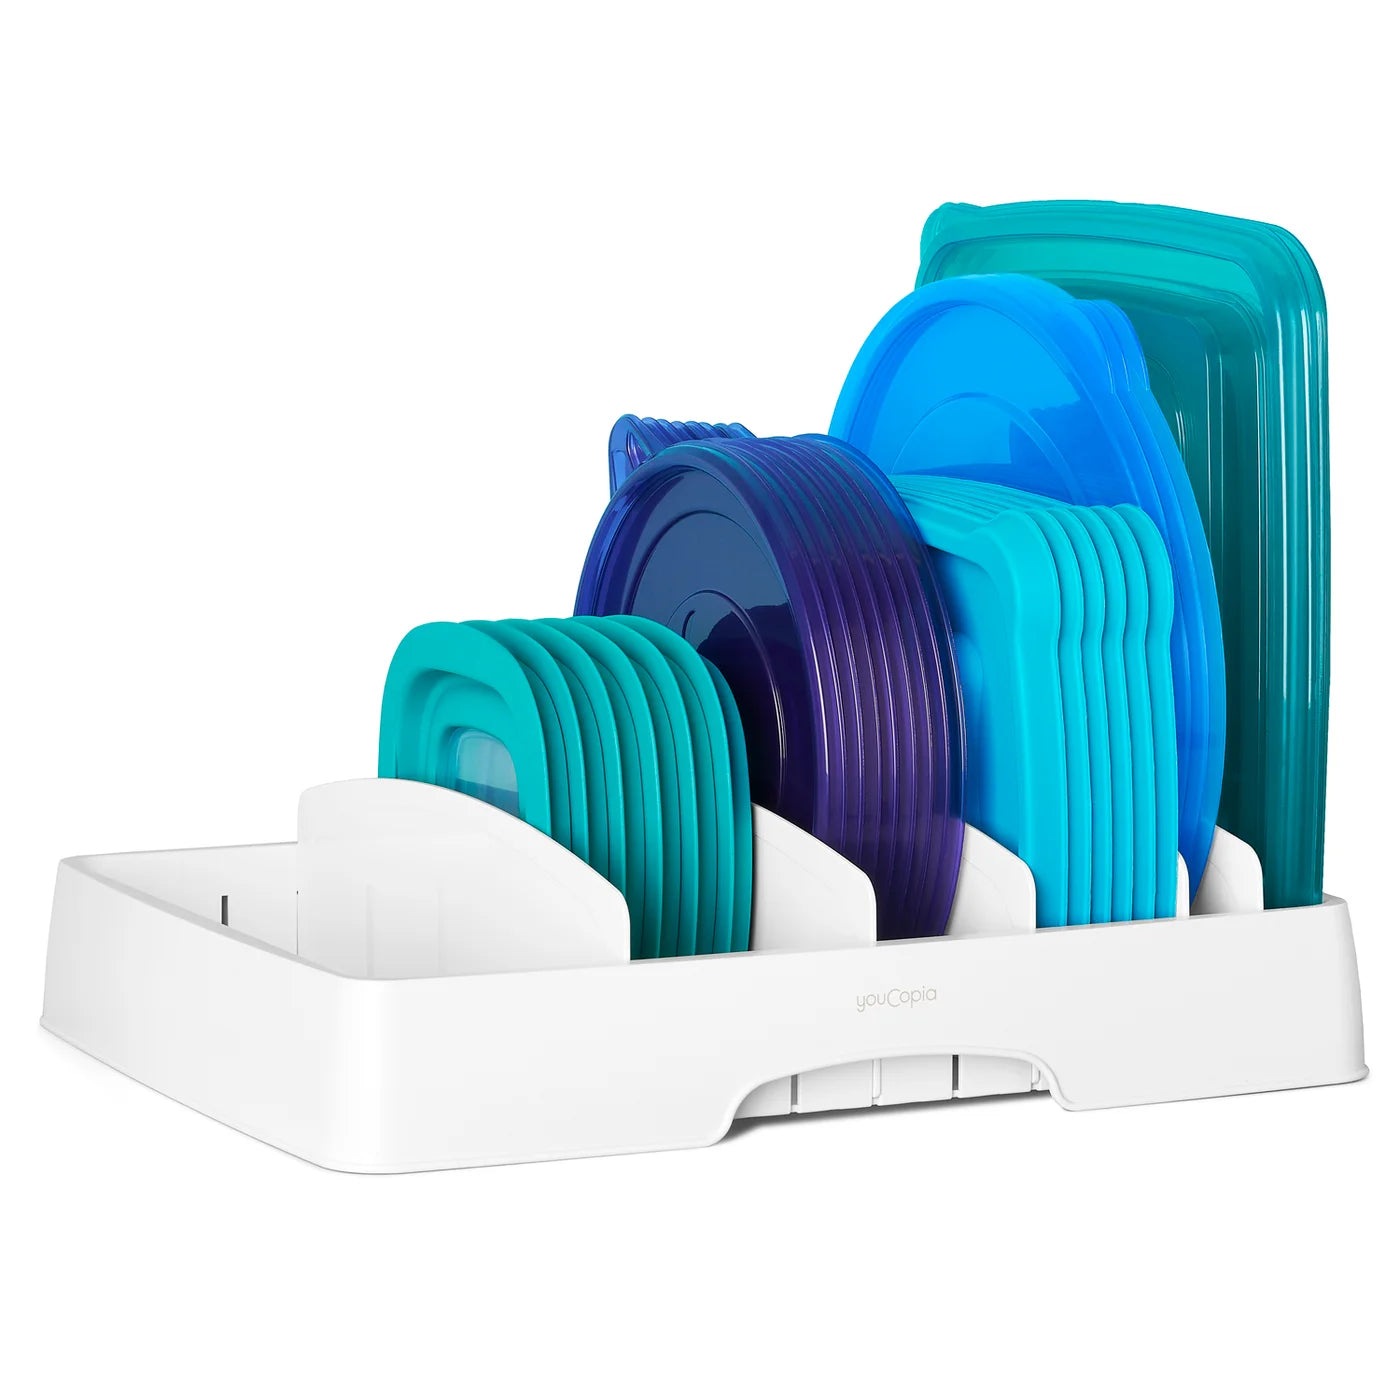 STORALID Container Lid Organizer